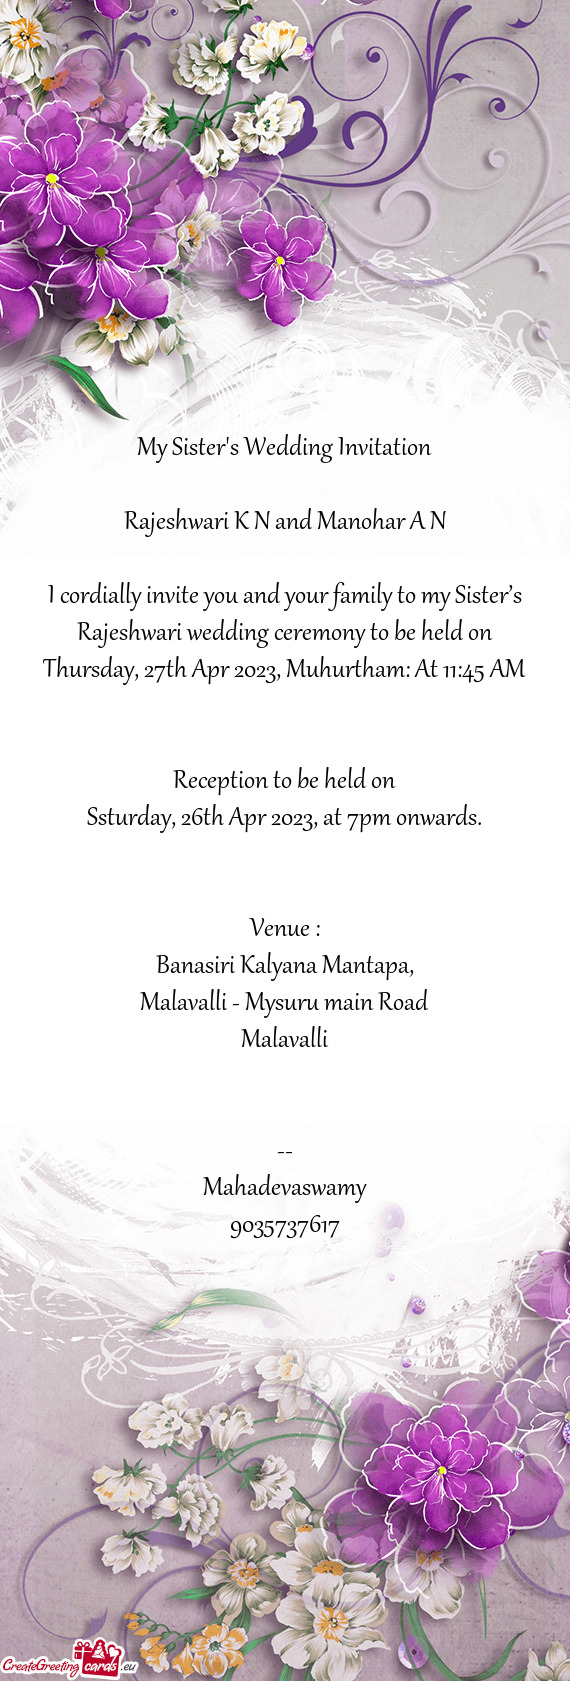 I cordially invite you and your family to my Sister’s Rajeshwari wedding ceremony to be held on